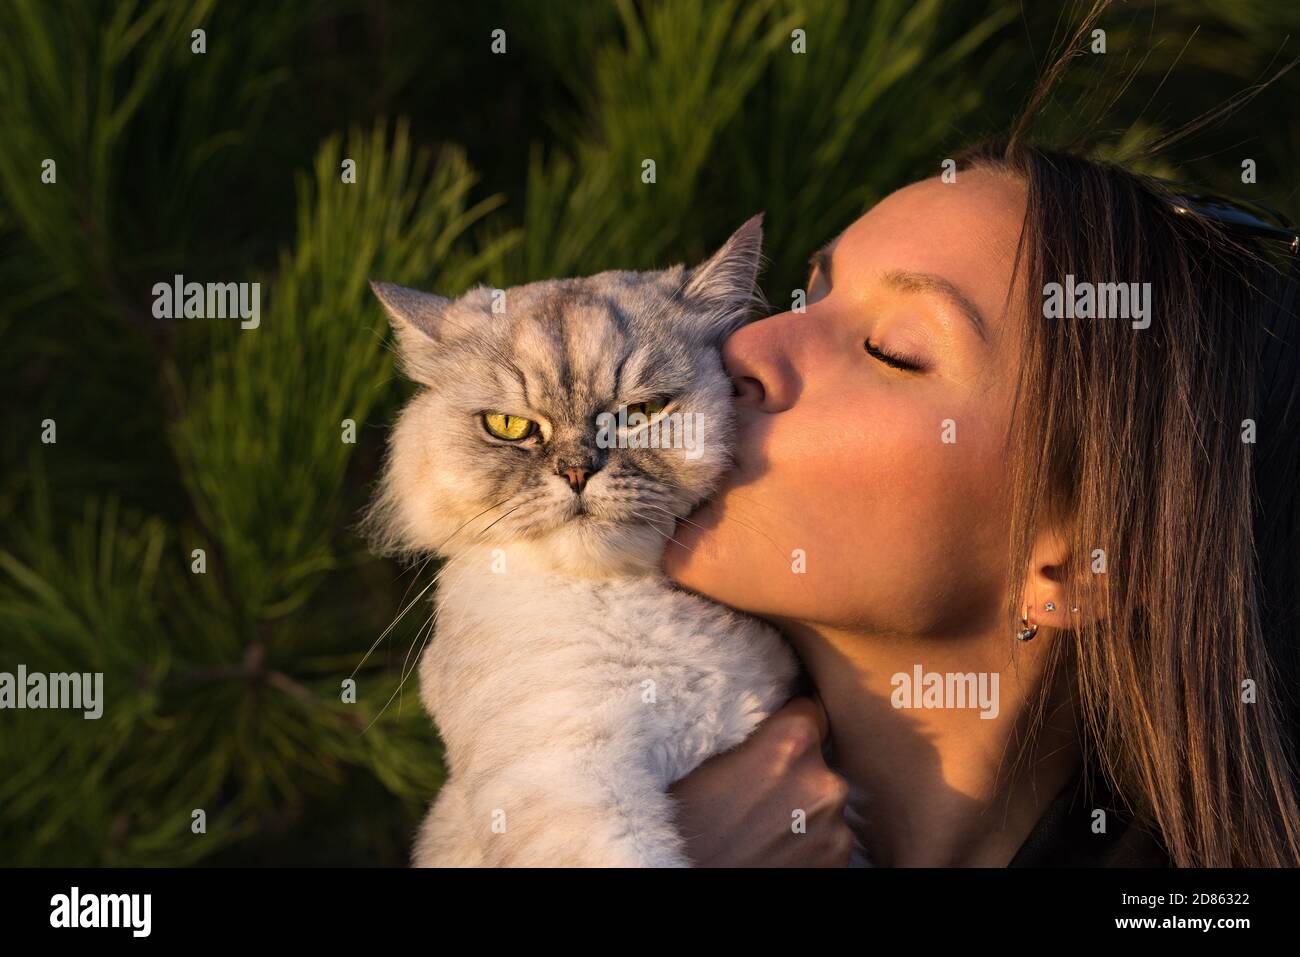 Cute girl kisses her lovely funny grumpy cat. Cat with owner. Love for cats. Naughty cat owner. Cat get angry when owner kisses him. Stock Photo